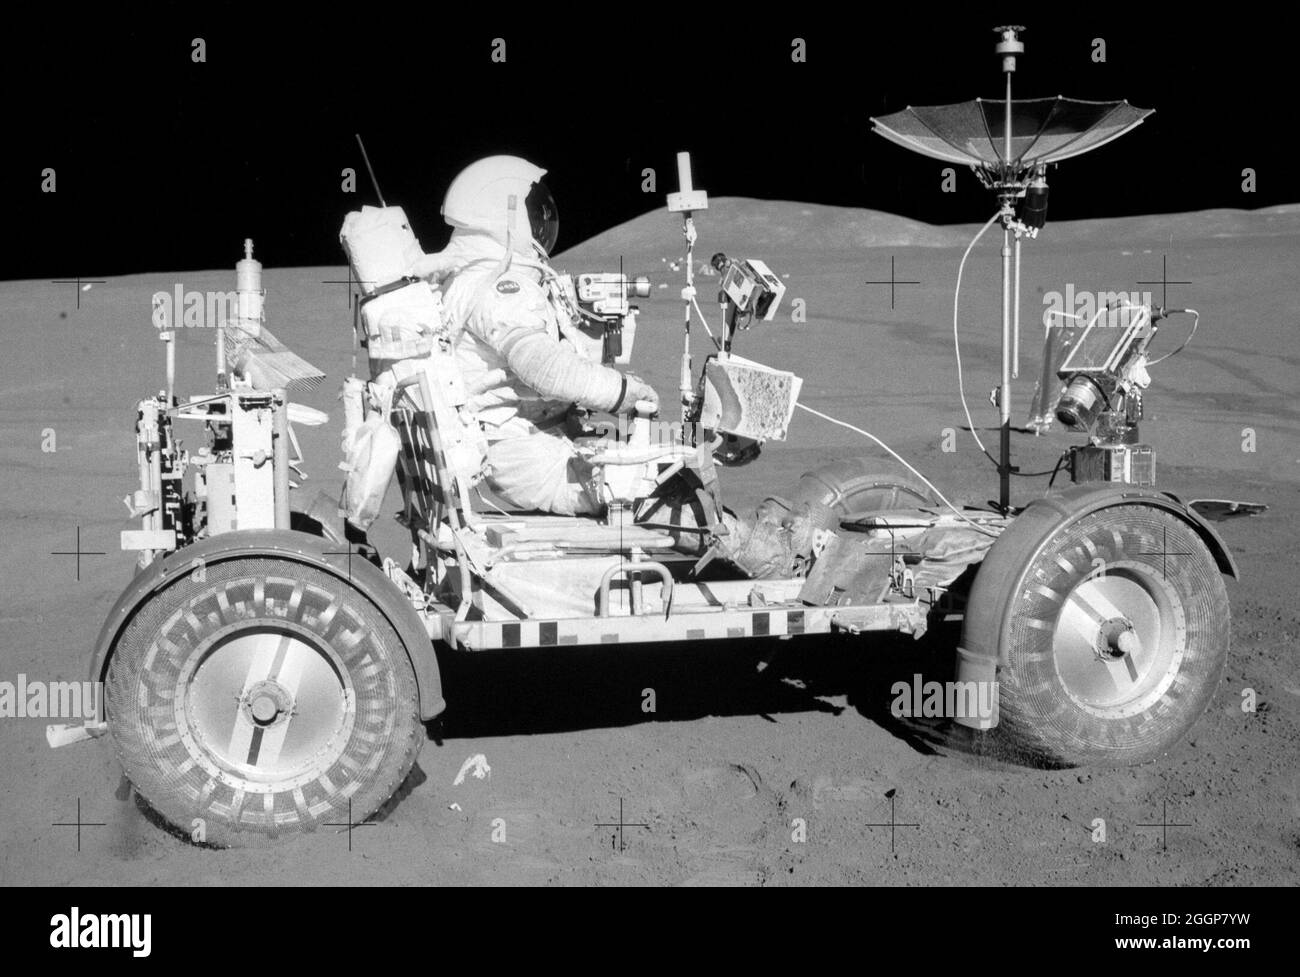 NASA Astronaut David Scott waits in the lightweight, electric-powered Lunar Roving Vehicle for the return trip to the Lunar Module, Falcon, with rocks and soil collected near the Hadley-Apennine landing site on the Moon. Stock Photo